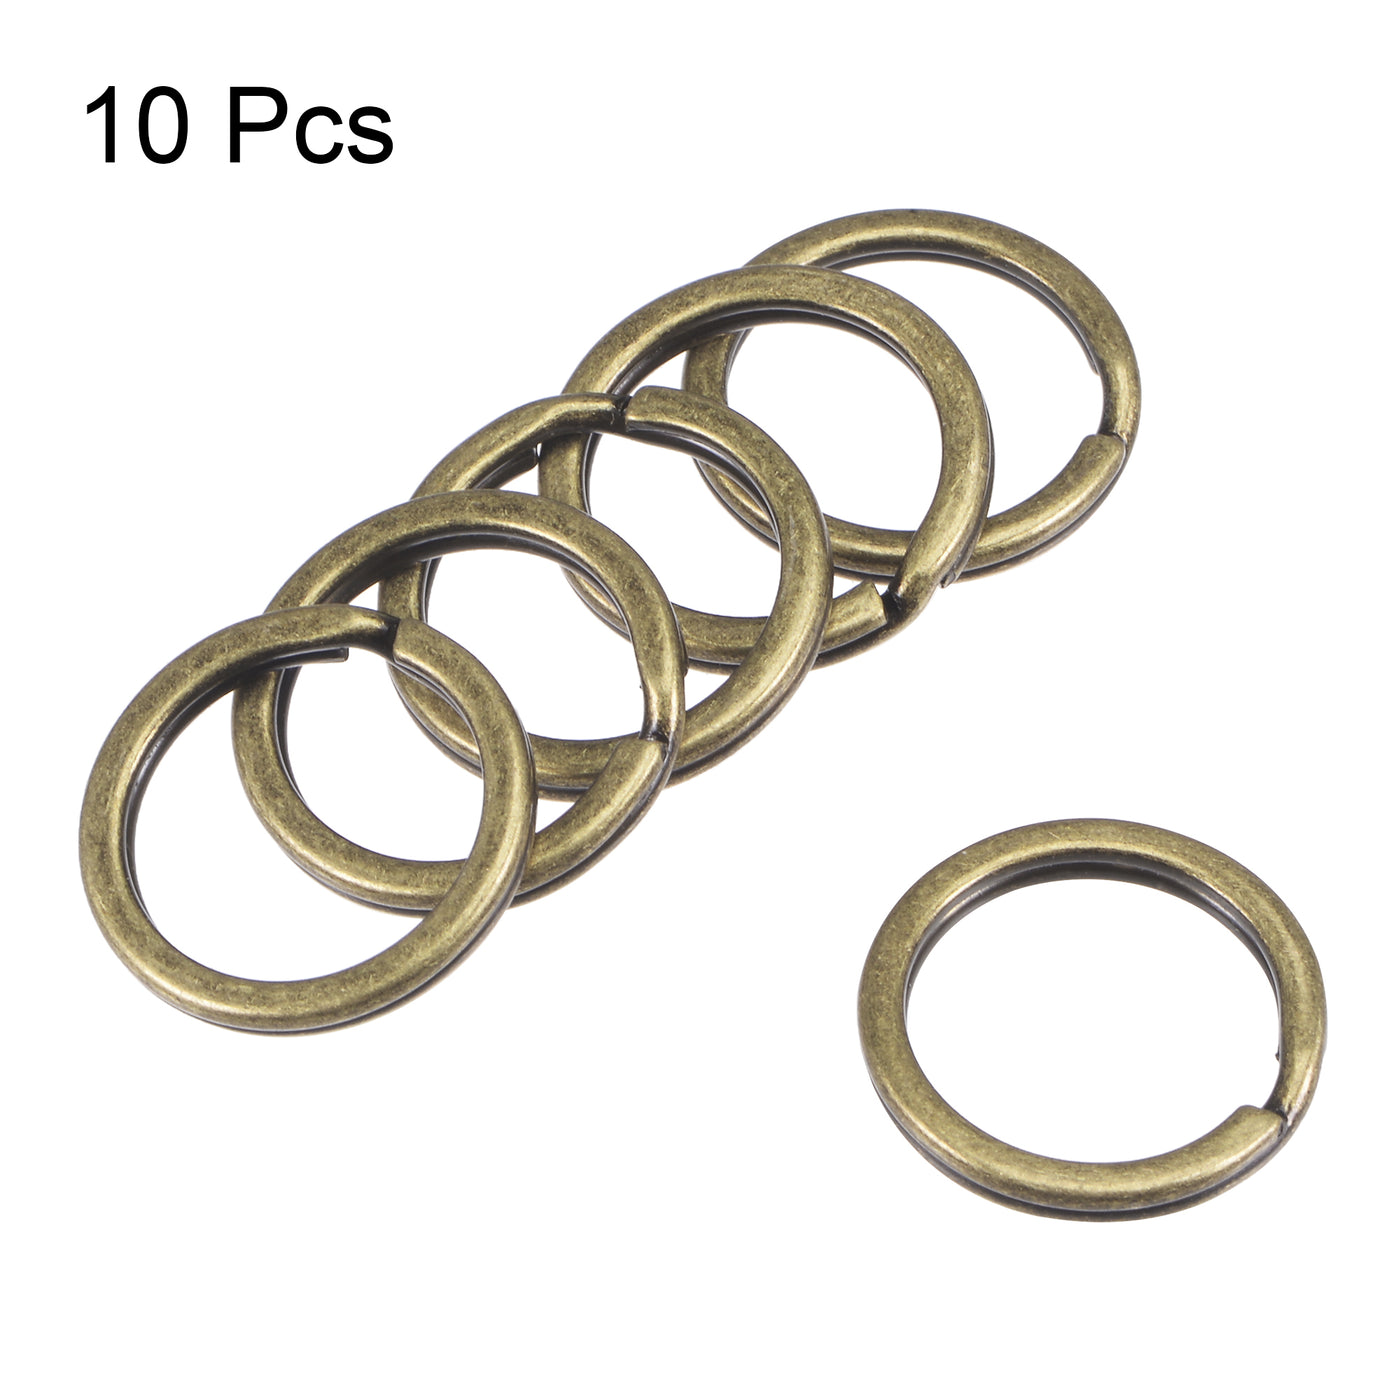 Uxcell Uxcell Split Key Ring 35mm Open Flat Jump Connector for Lanyard Zipper Handbag, Electroplated Iron, Pack of 10